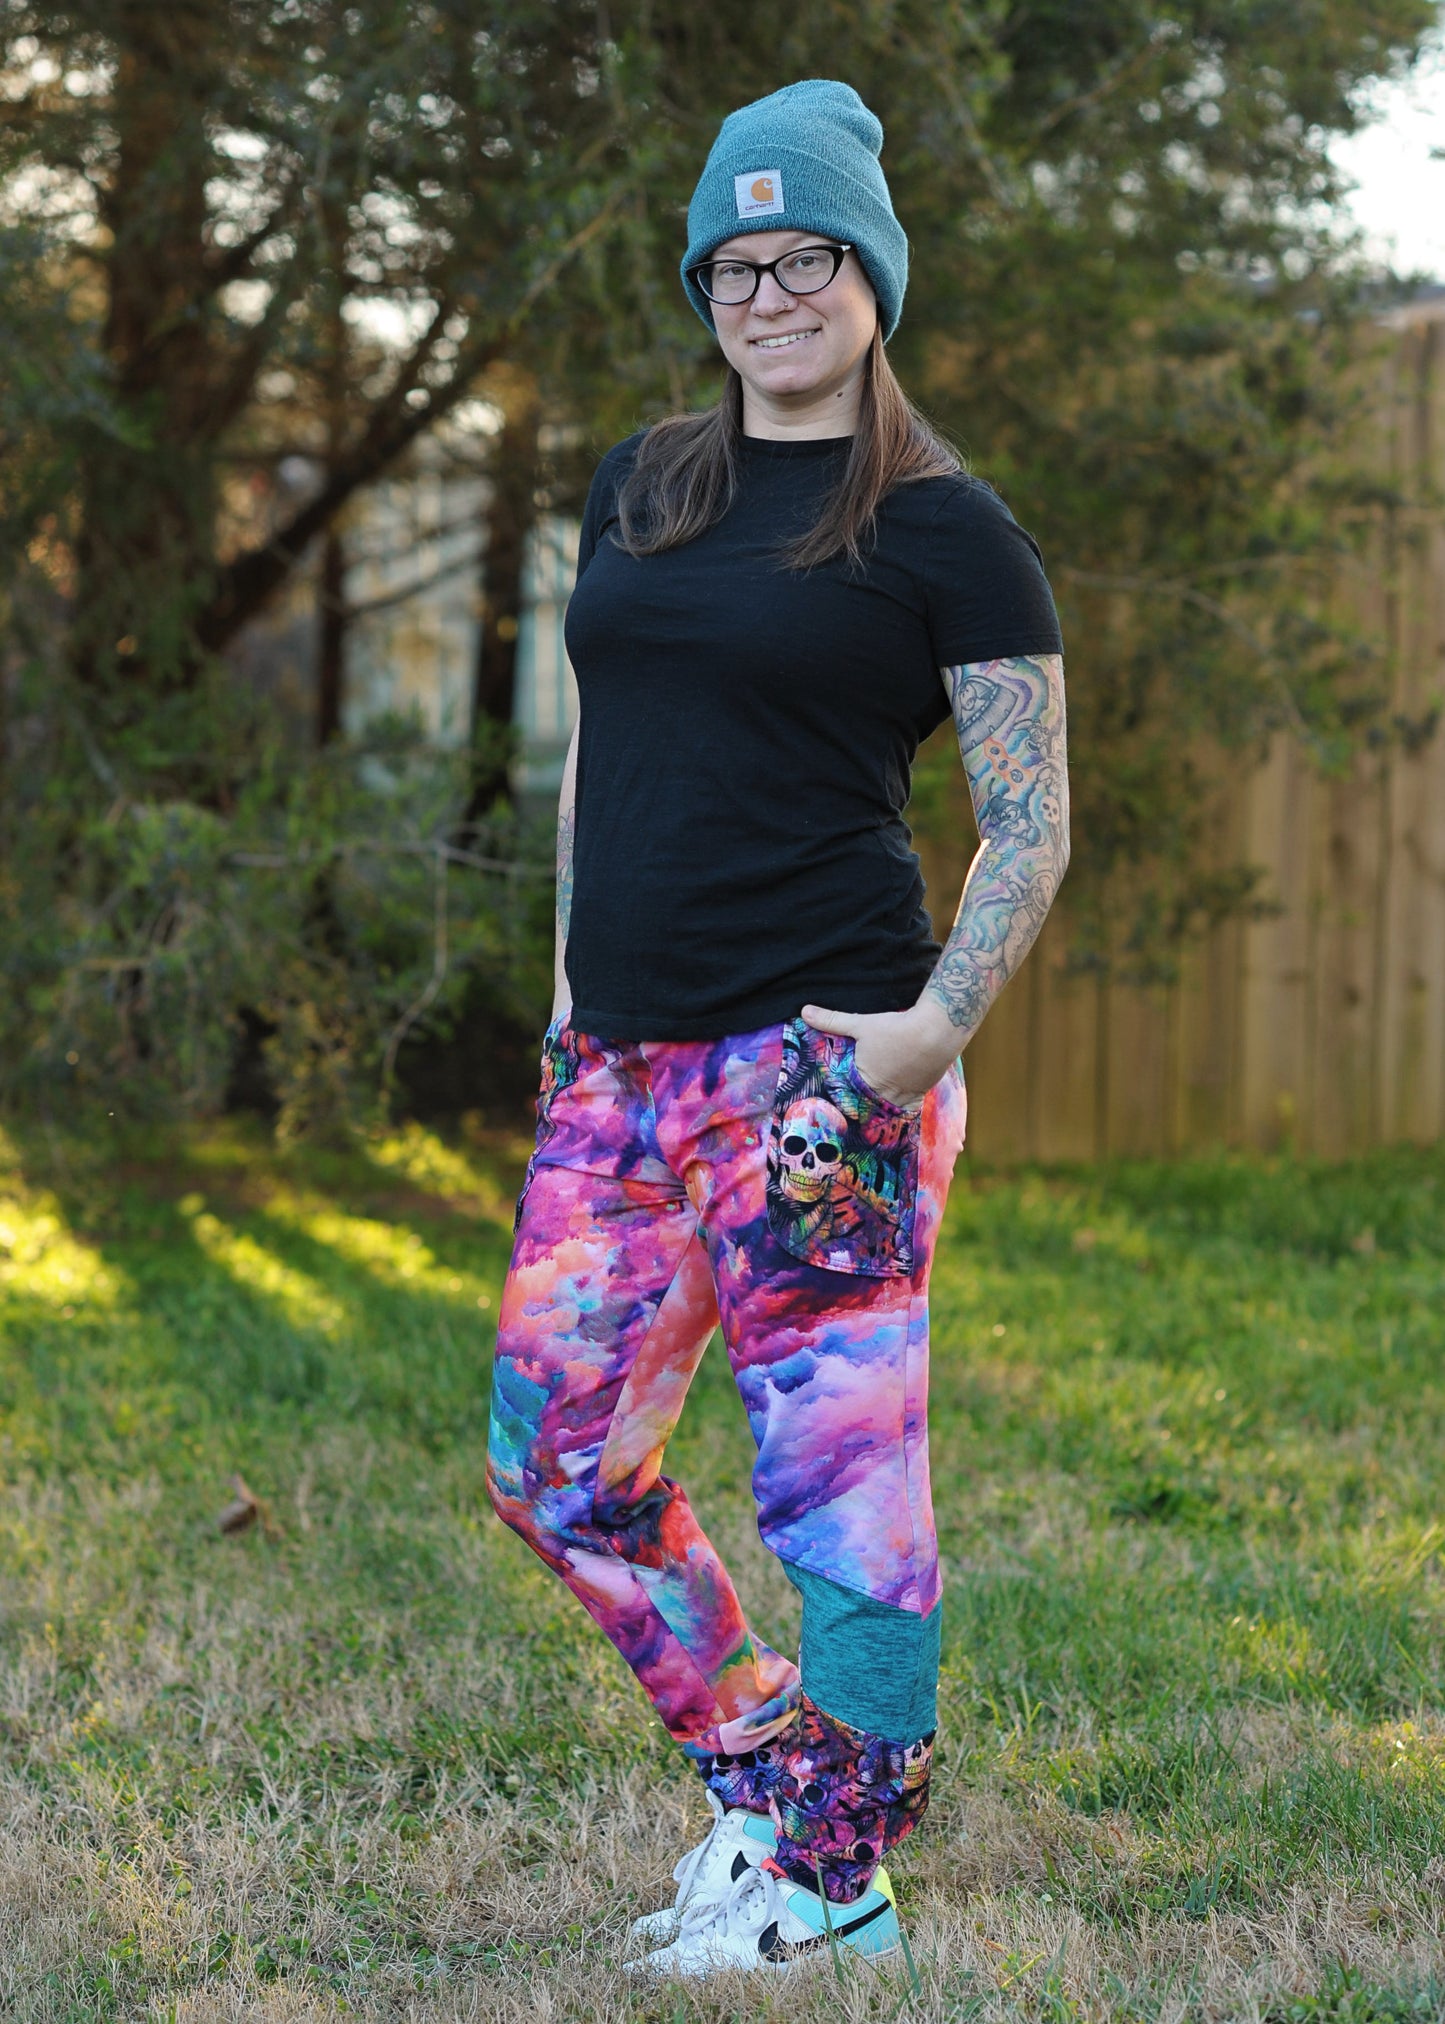 Adult Size - The Universal Joggers - Unisex Stretch Pants with color block options PDF Digital Sewing Patterns